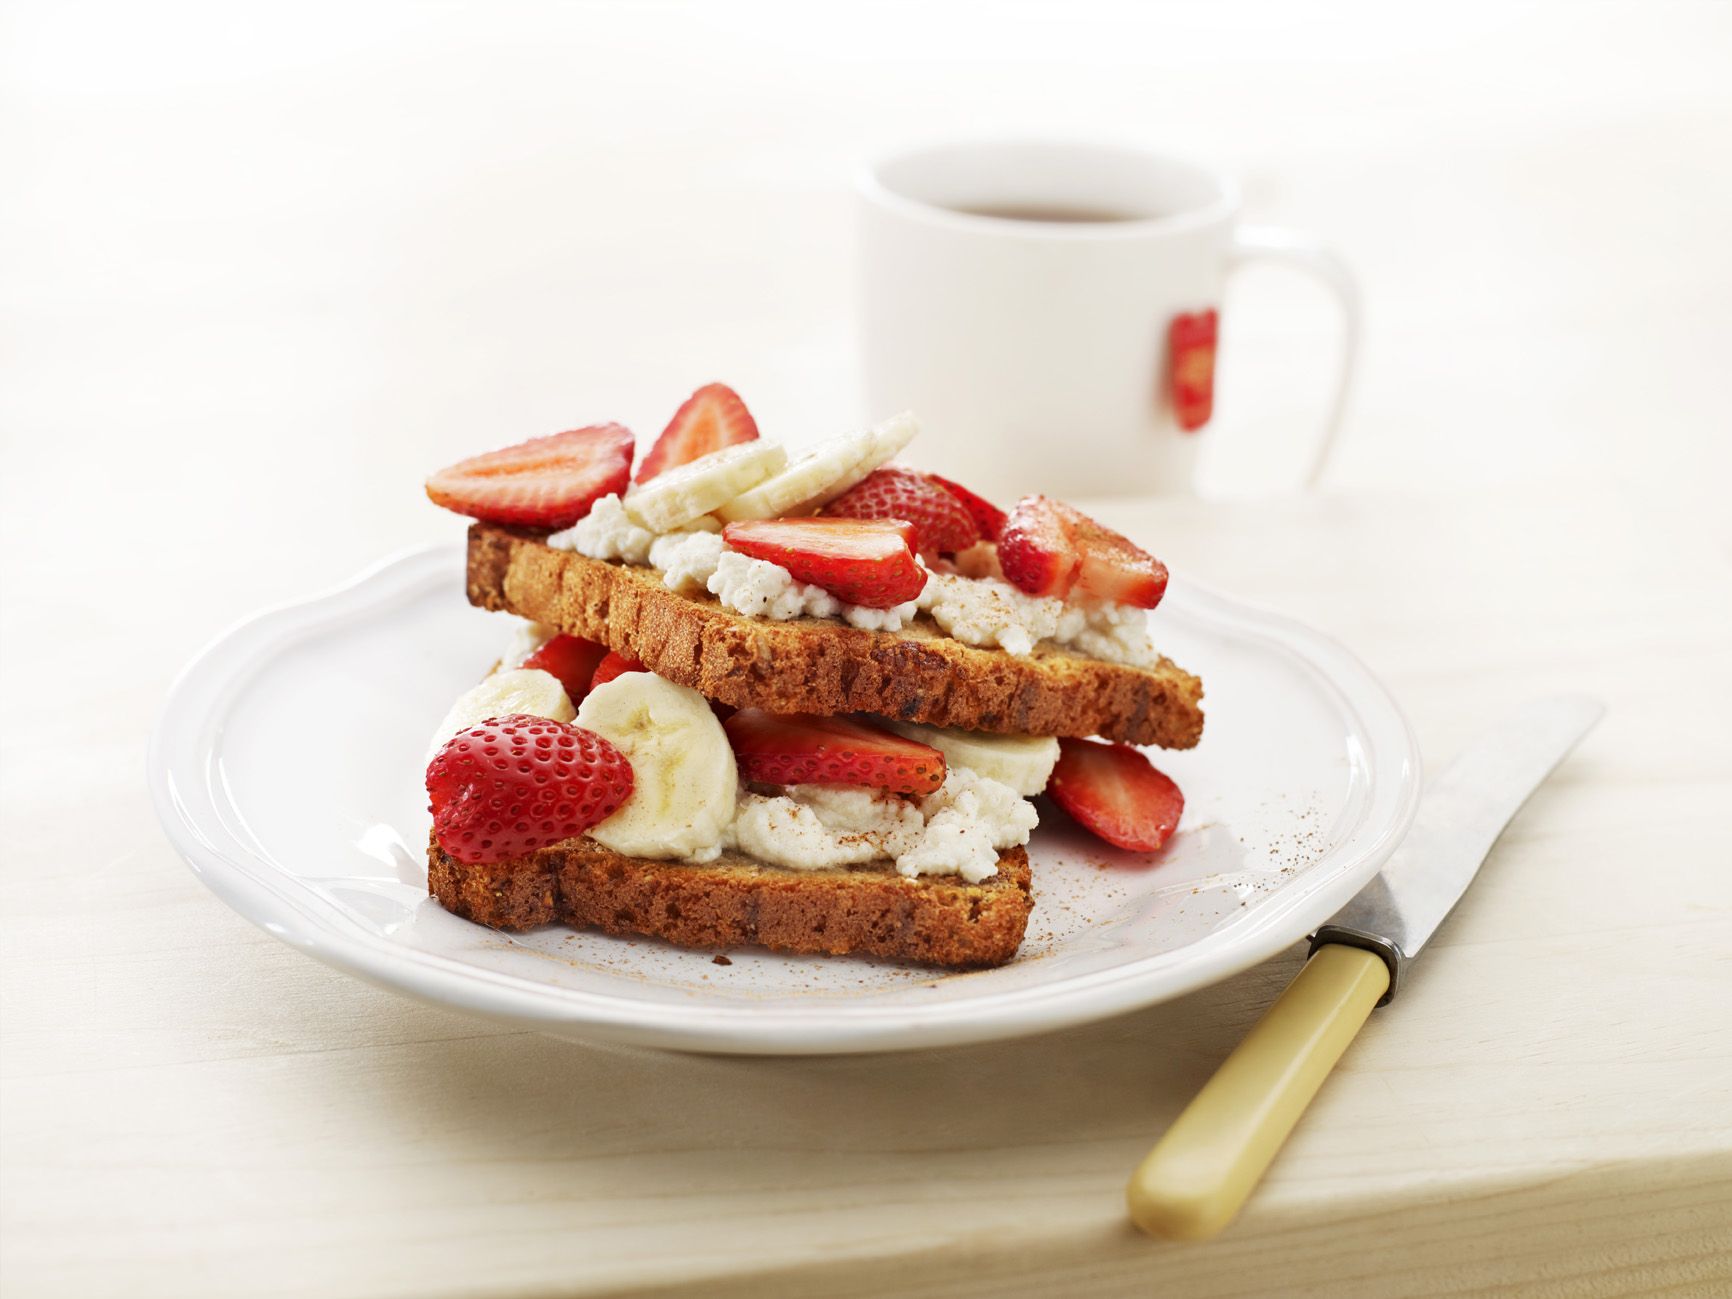 A white ceramic plate with two slices of bread topped with ricotta, sliced banana and sliced strawberries. A cup of black tea sits in the background with the teabag still in it.